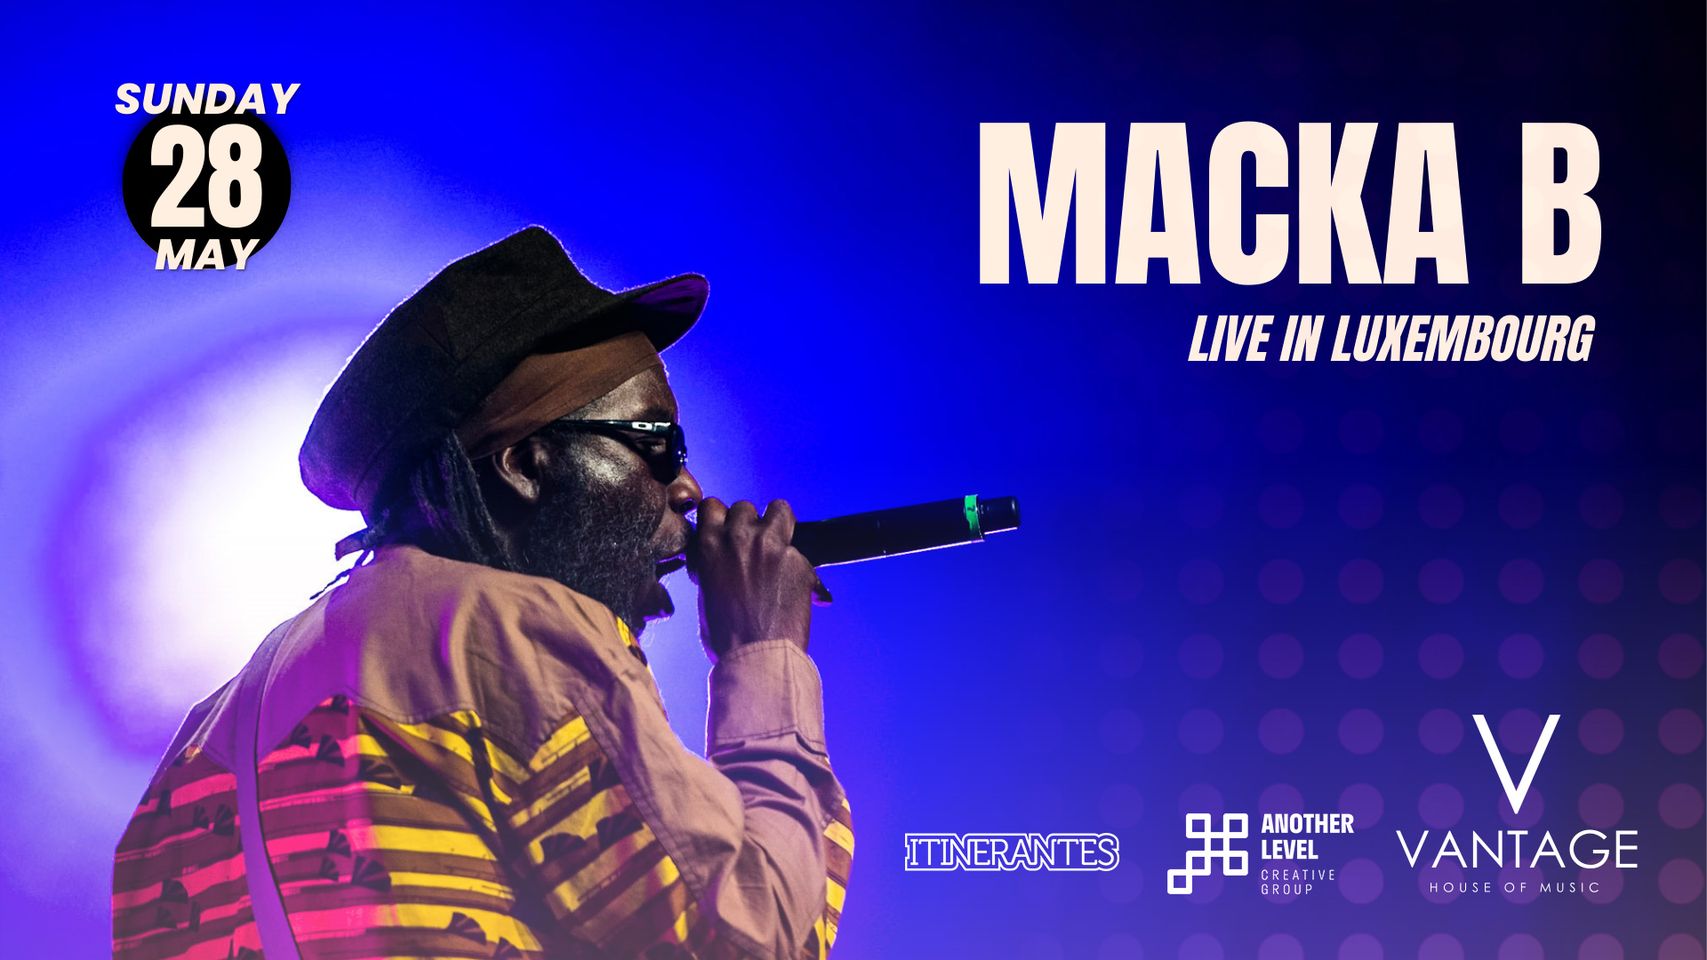 Macka B Live concert in luxembourg